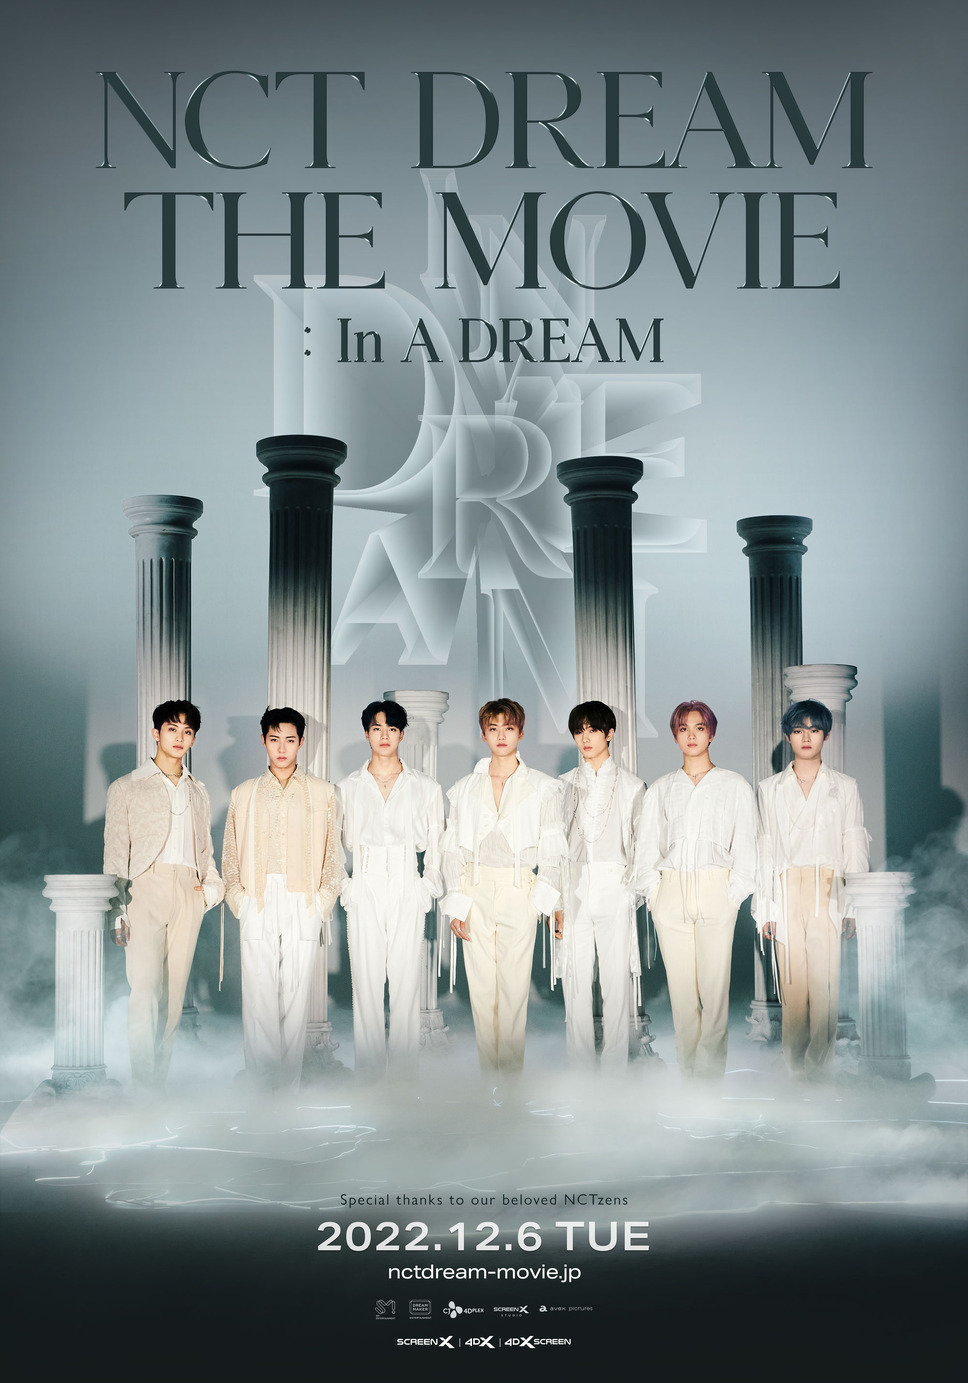 NCT DREAM THE MOVIE：In A DREAM 2枚目の写真・画像